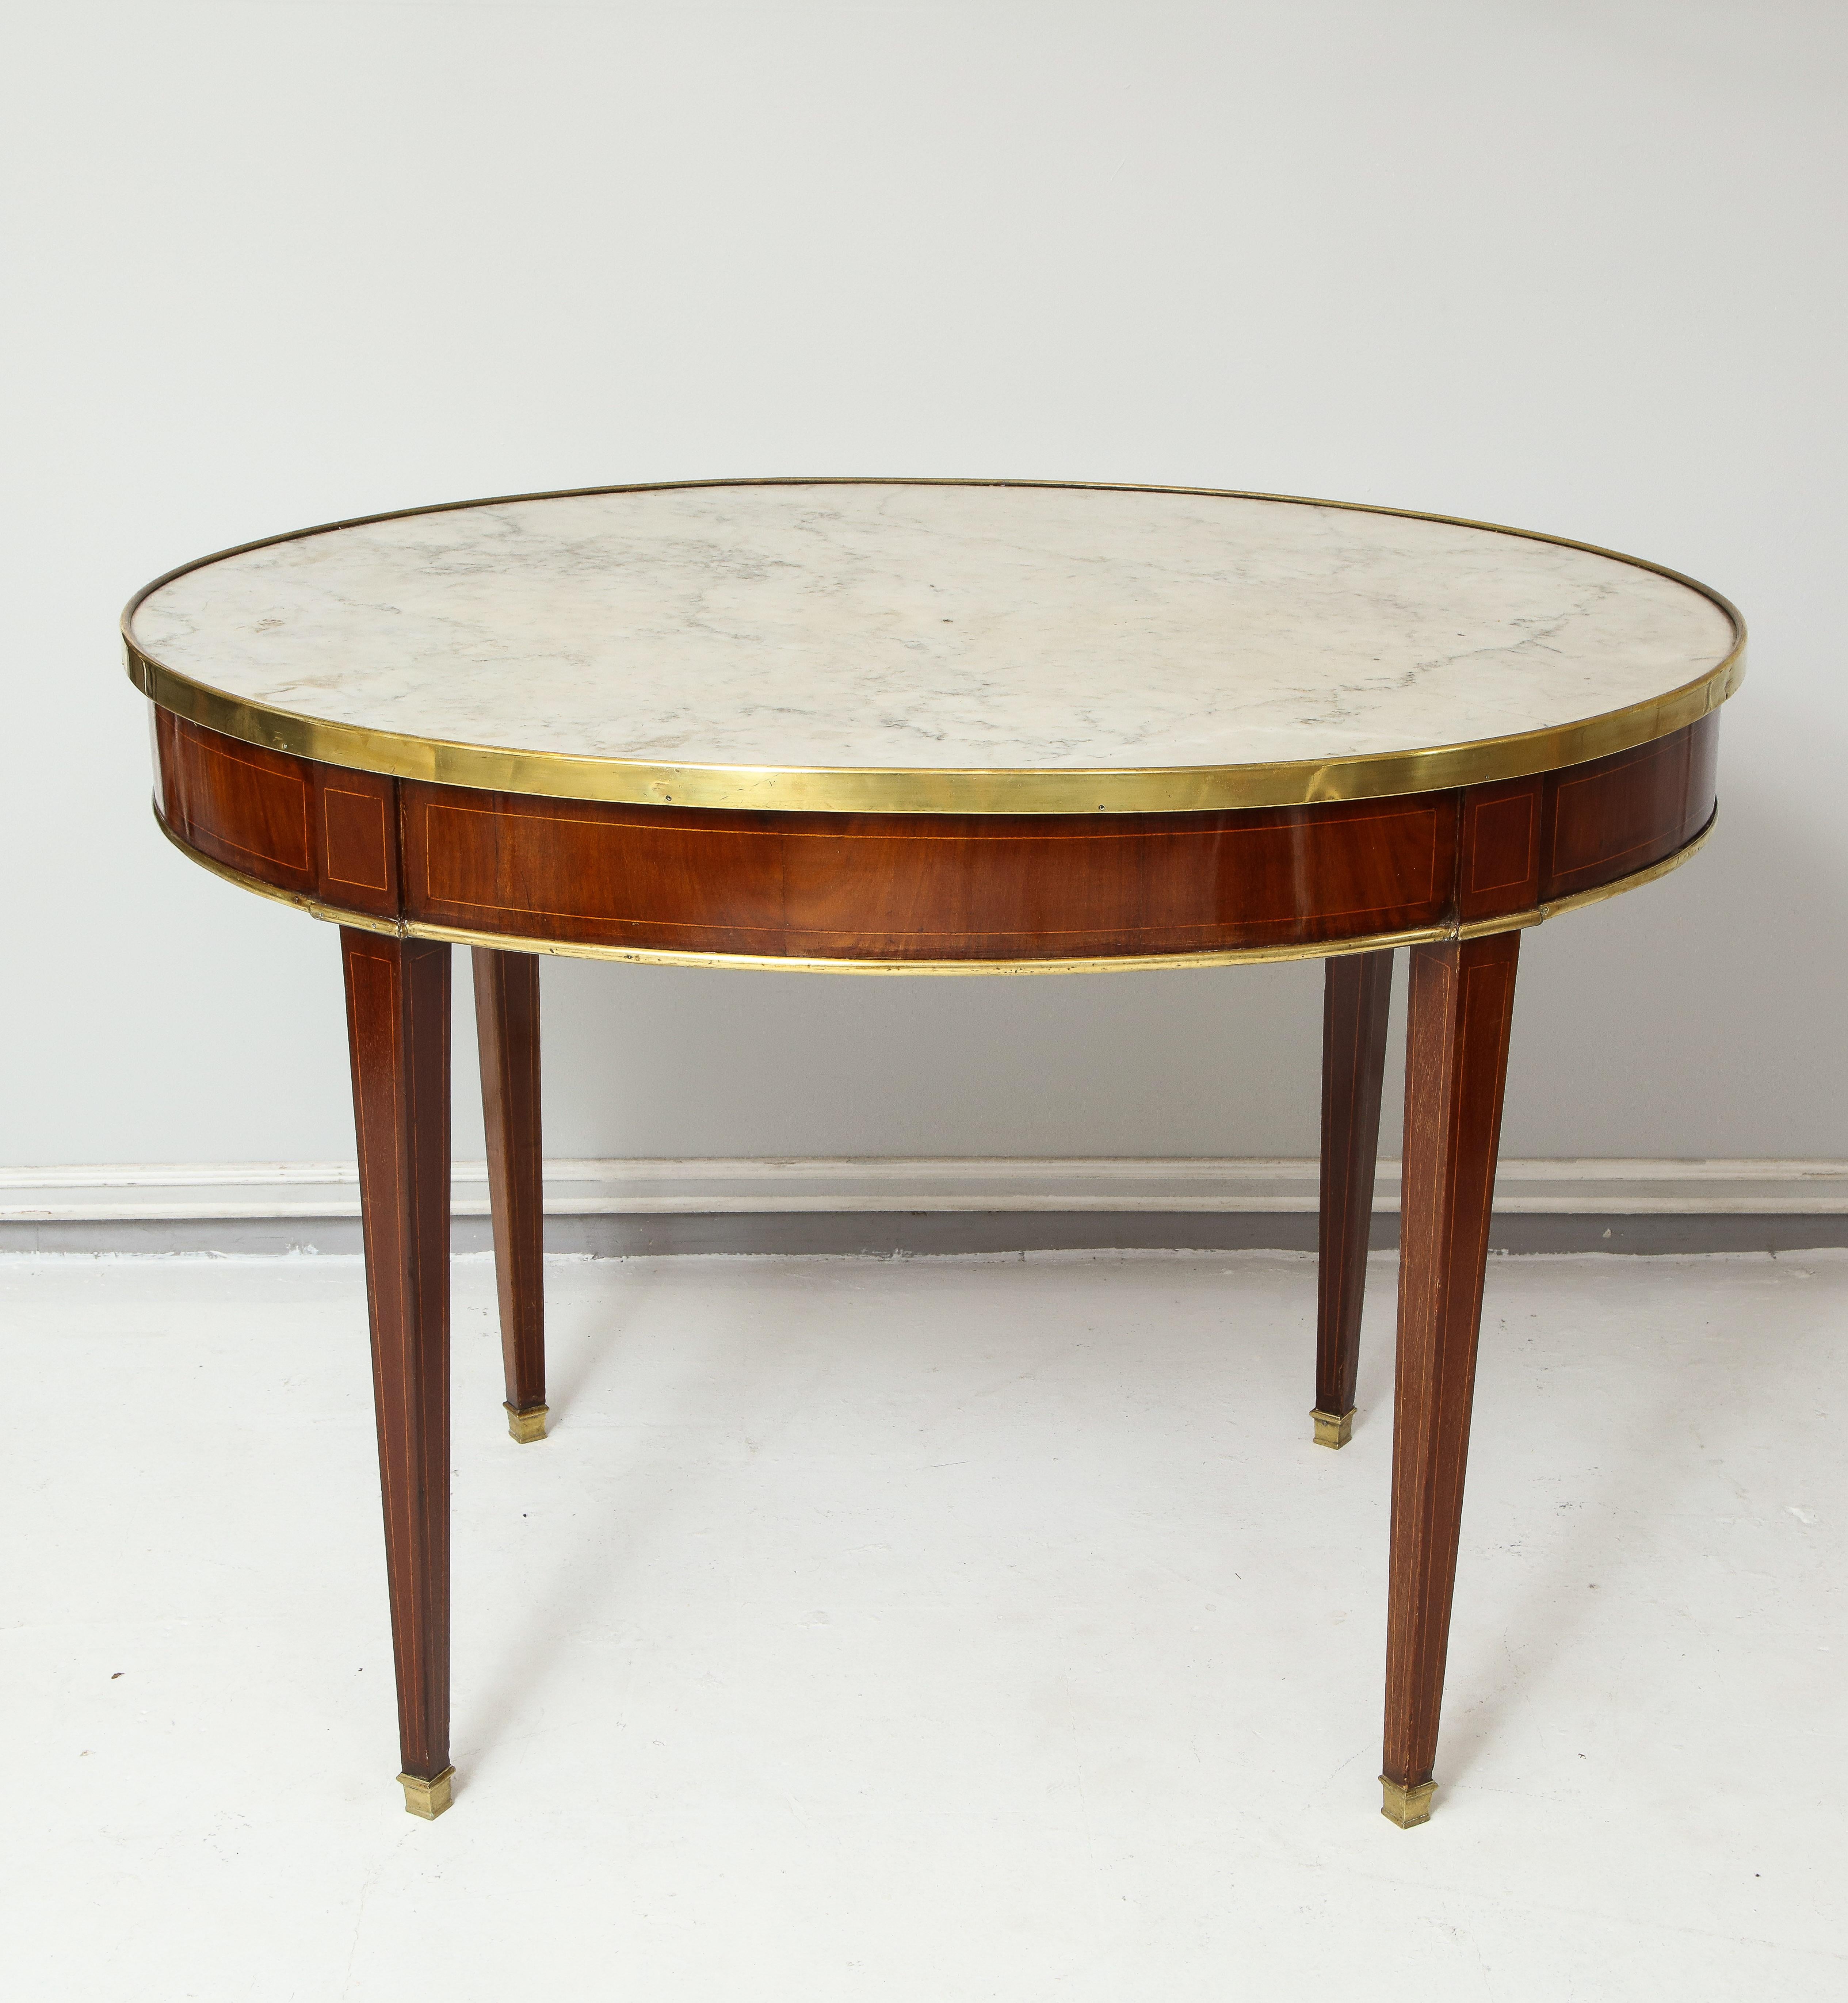 Antique French mahogany oval marble-top bronze-mounted bouillote table on tapered legs.